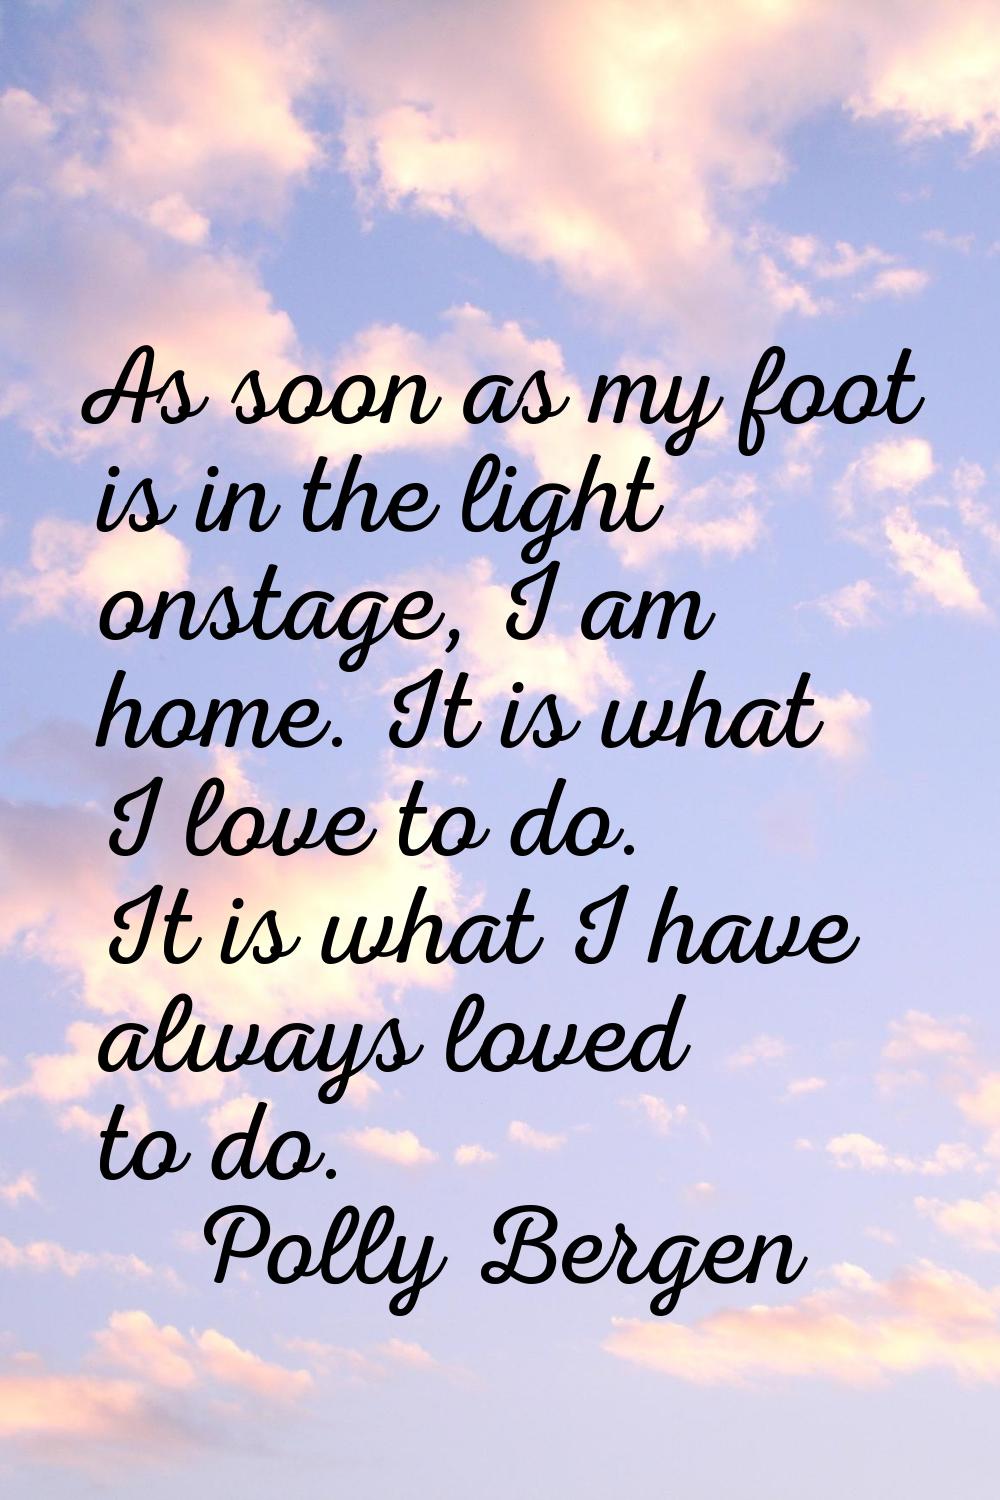 As soon as my foot is in the light onstage, I am home. It is what I love to do. It is what I have a